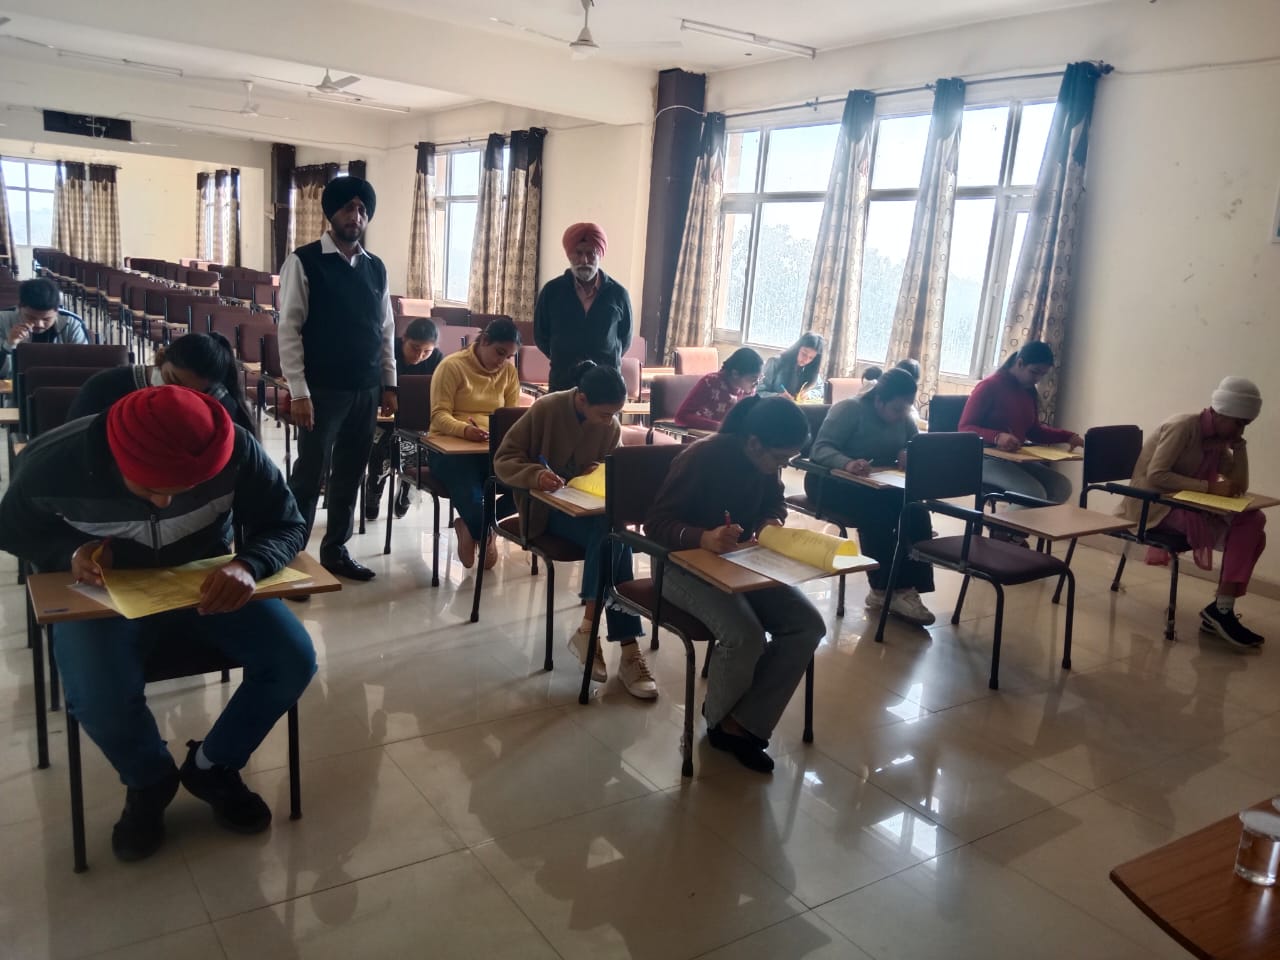 On 15th Feb, 2023 (Wesdrsday) a Moral Education Exam was conducted by Guru Gobind Singh Study Circle which is affiliated with P.S.E.B. curriculum. The Exam was conducted in the College premises. The sole aim of the exam is to inculcate and develop the moral, ethical etiquette in the students. This exam was dedicated towards 550th Birthday Anniversary of Shri Guru Nanak Dev Ji. A total of 32 students from the College participated in this Exam. The exam was conducted under the able supervision of our Dean Dr. Rajeev and Mr. Harkamal Deep singh.HOD,EE with the consent of Chairman Sir Mr. SP Singh Ji. All the students took keen interest in attempting the questions based on moral knowledge. Moreover this type of exams helps the students to be socially responsible and well mannered persons in their lives.